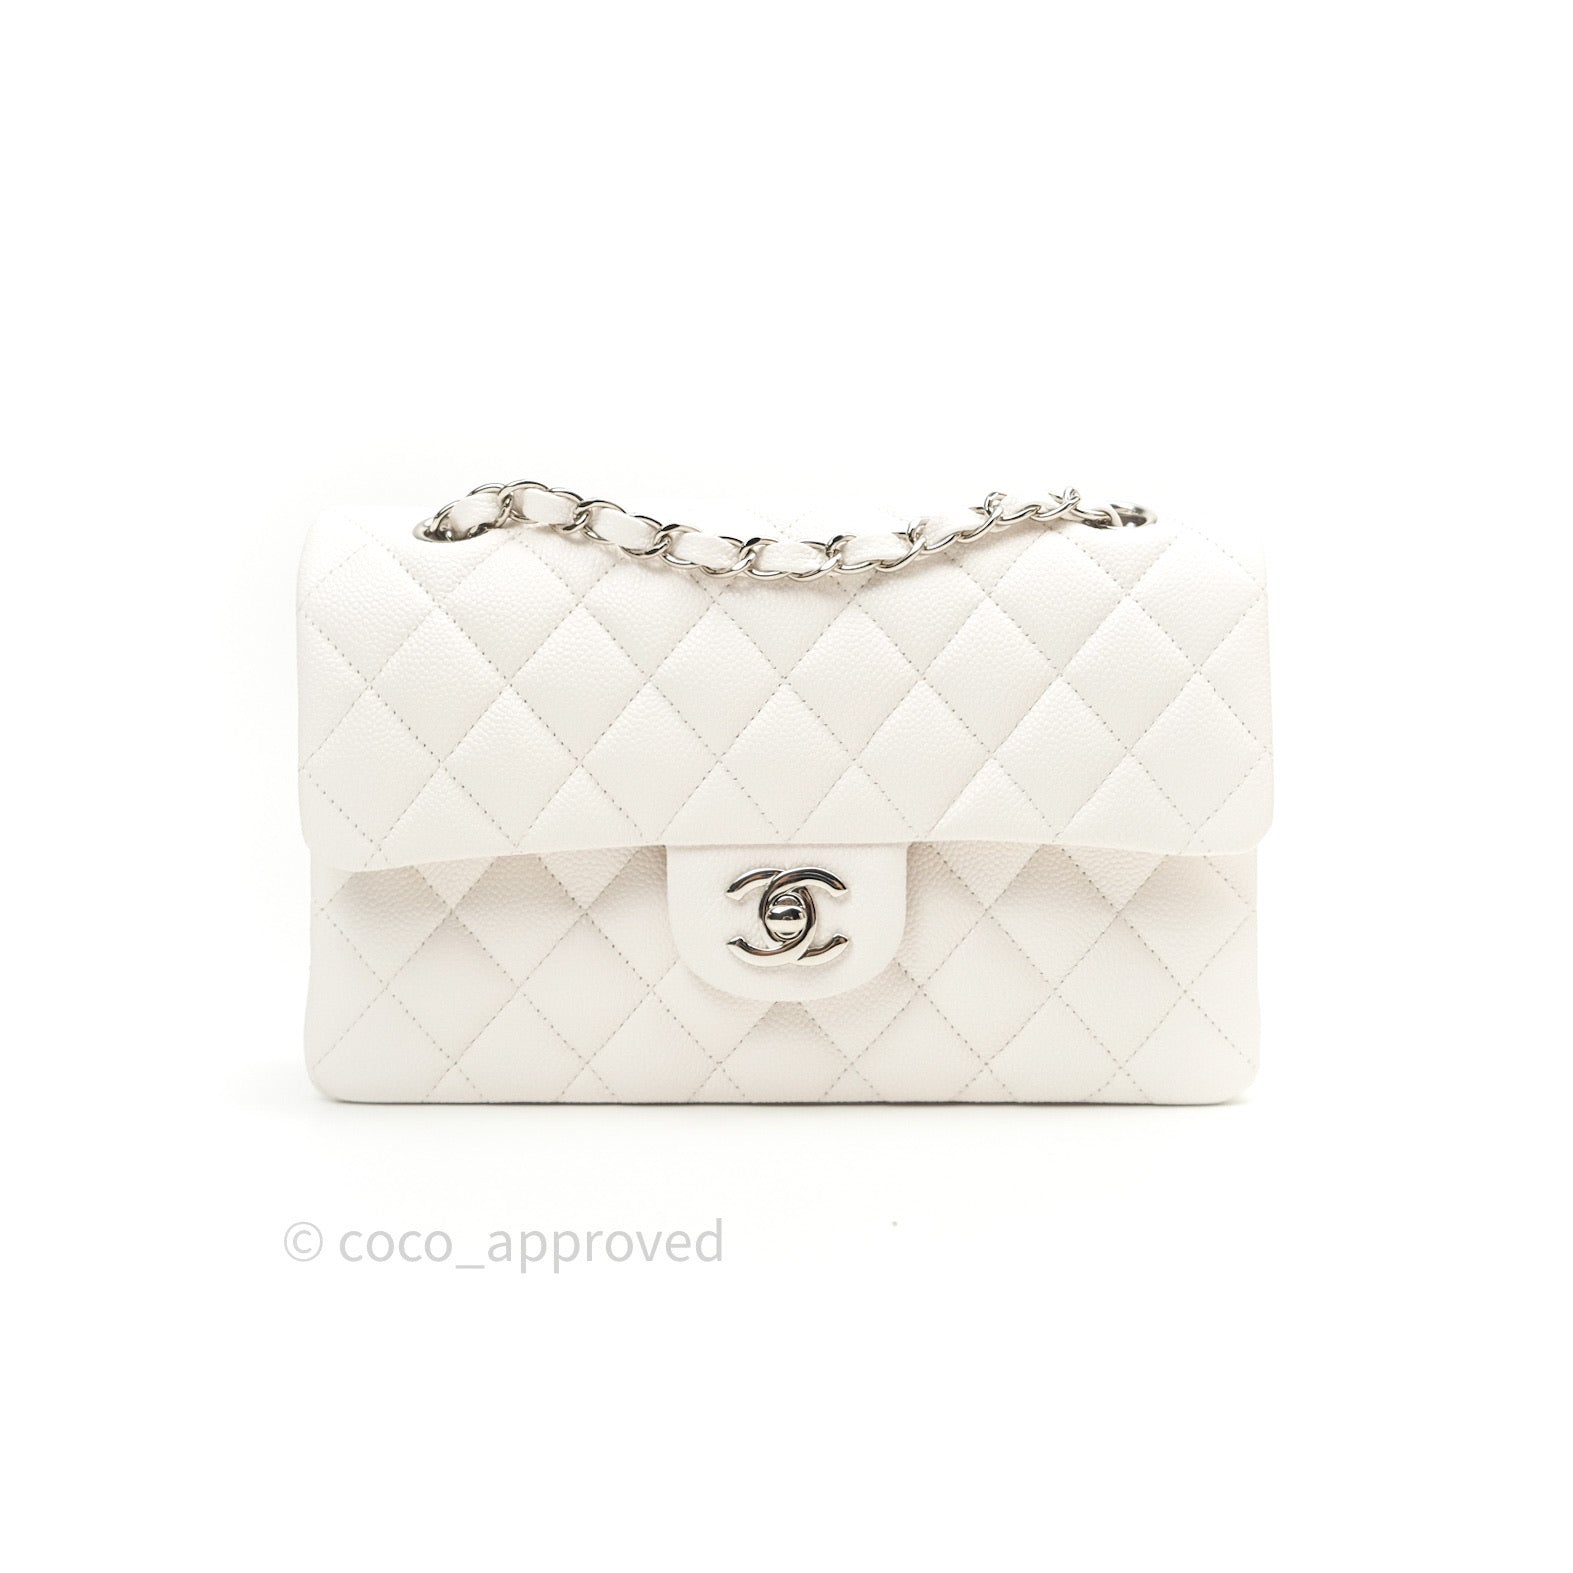 Chanel Classic Flap Bags for Sale in Sanford, NC - OfferUp